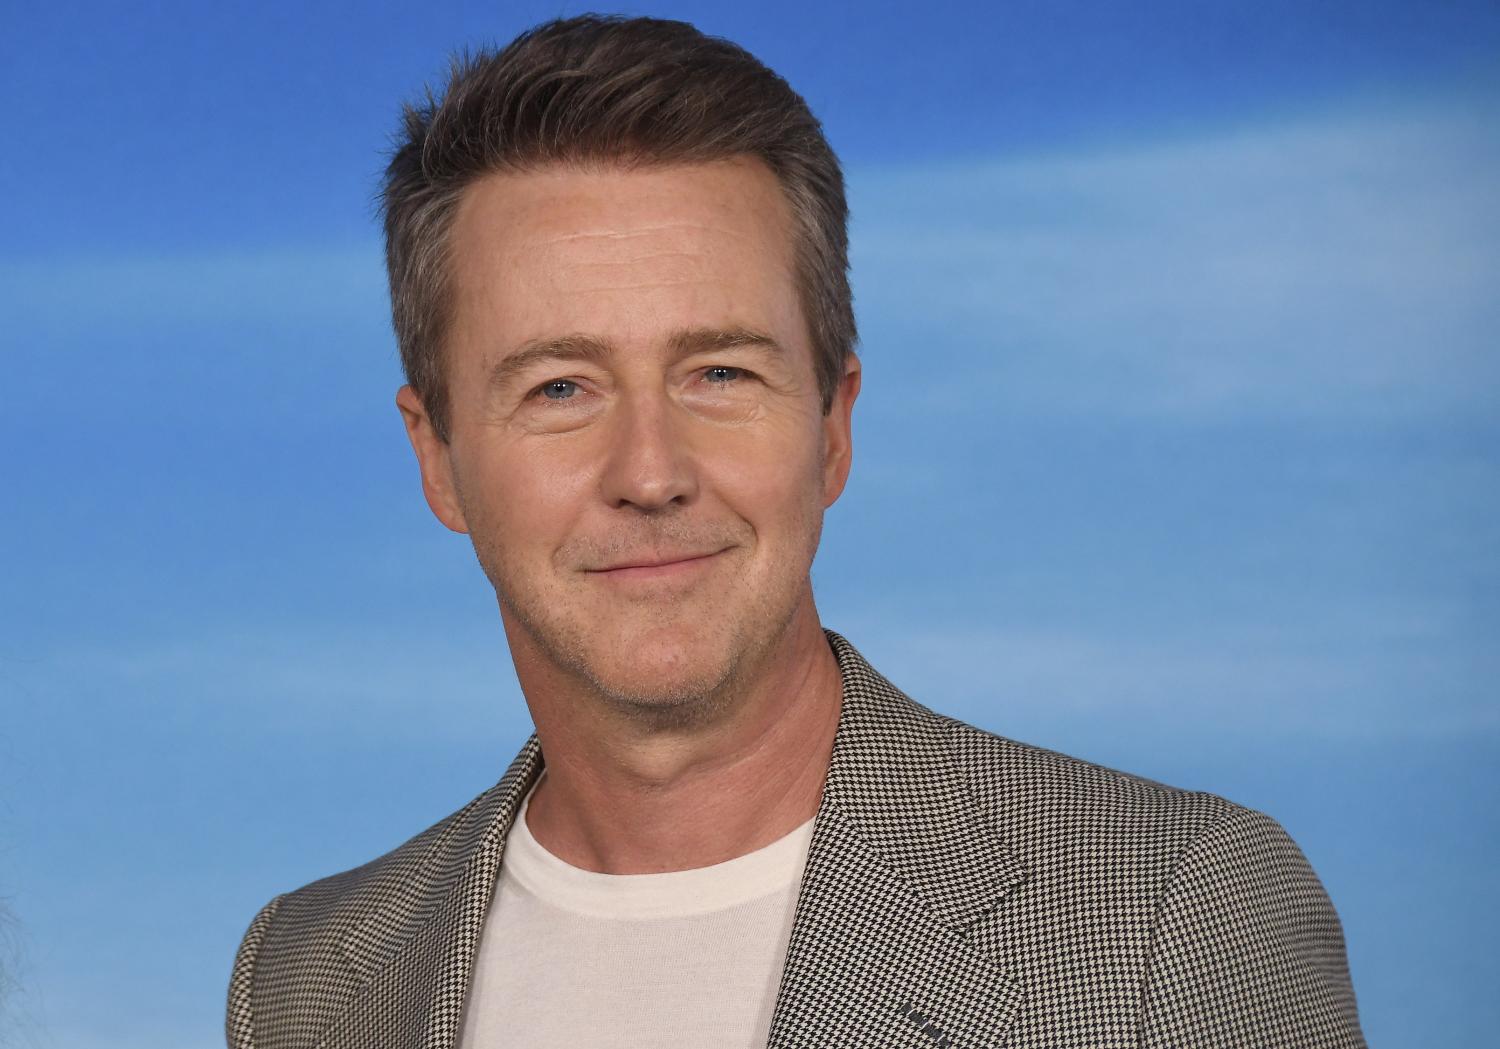 Edward Norton Makes "Uncomfortable" Discovery: His Ancestors Once Owned Slaves - 8 Days